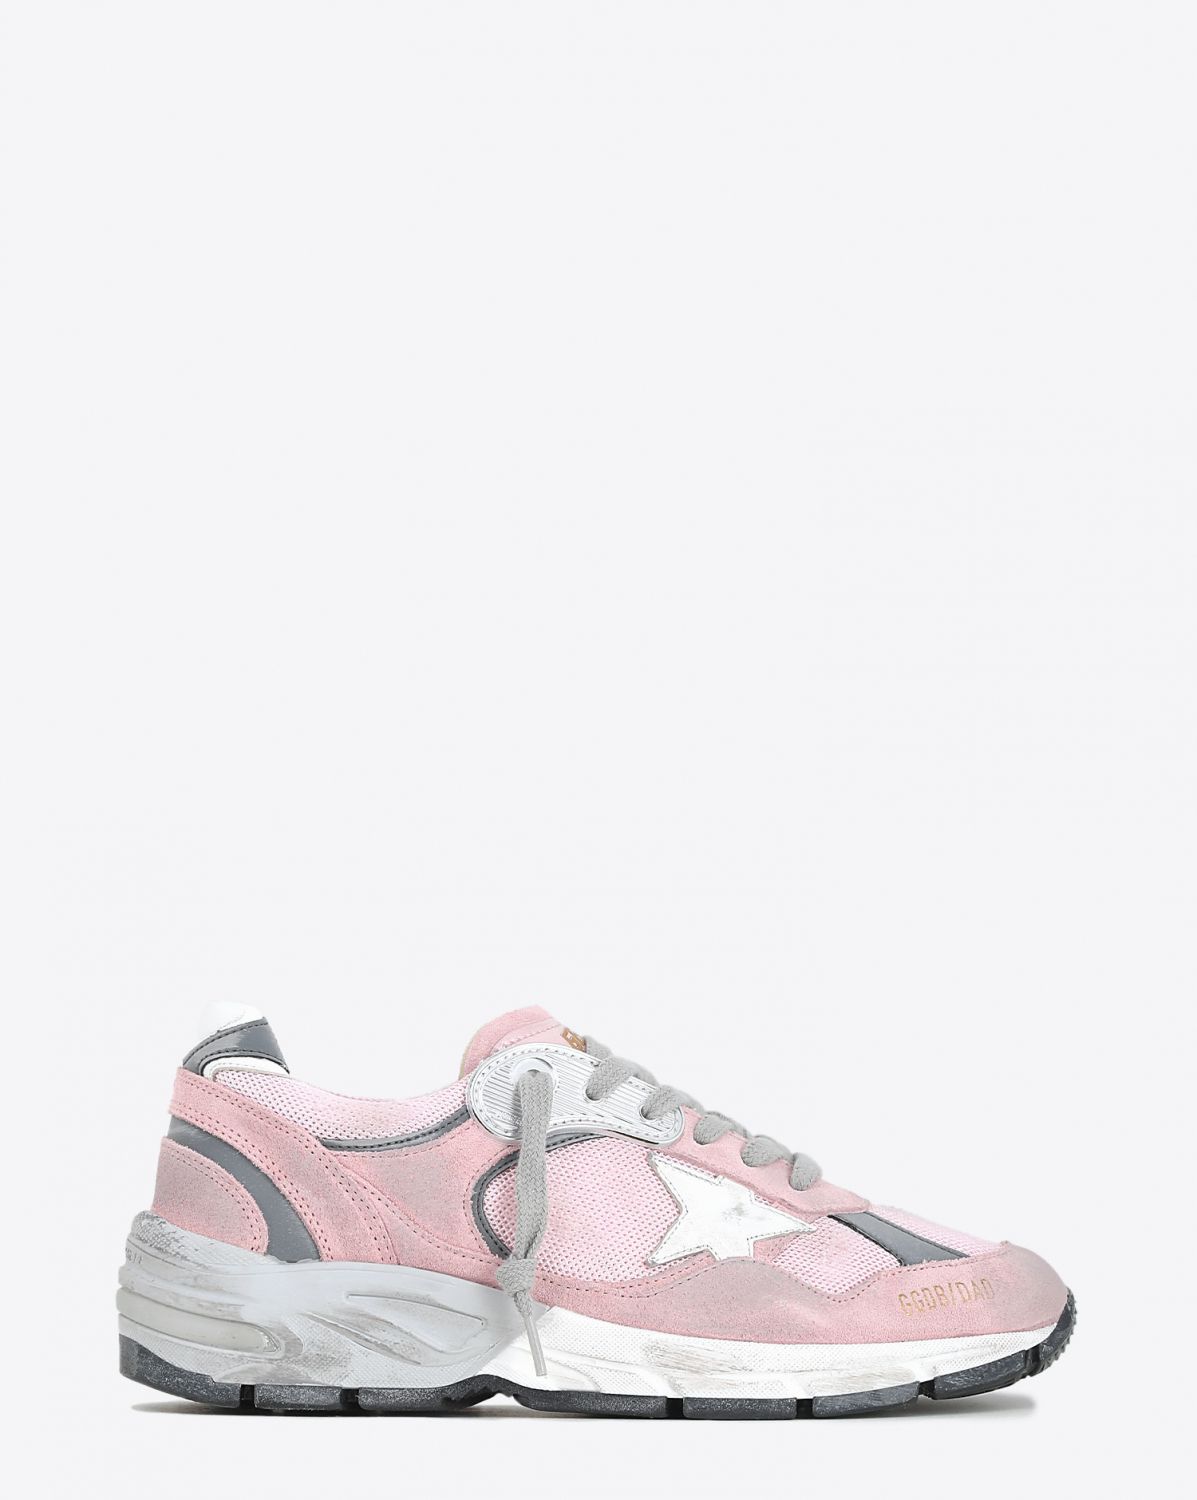 Sneakers Golden Goose Woman Collection Running Dad - Pink White 80454